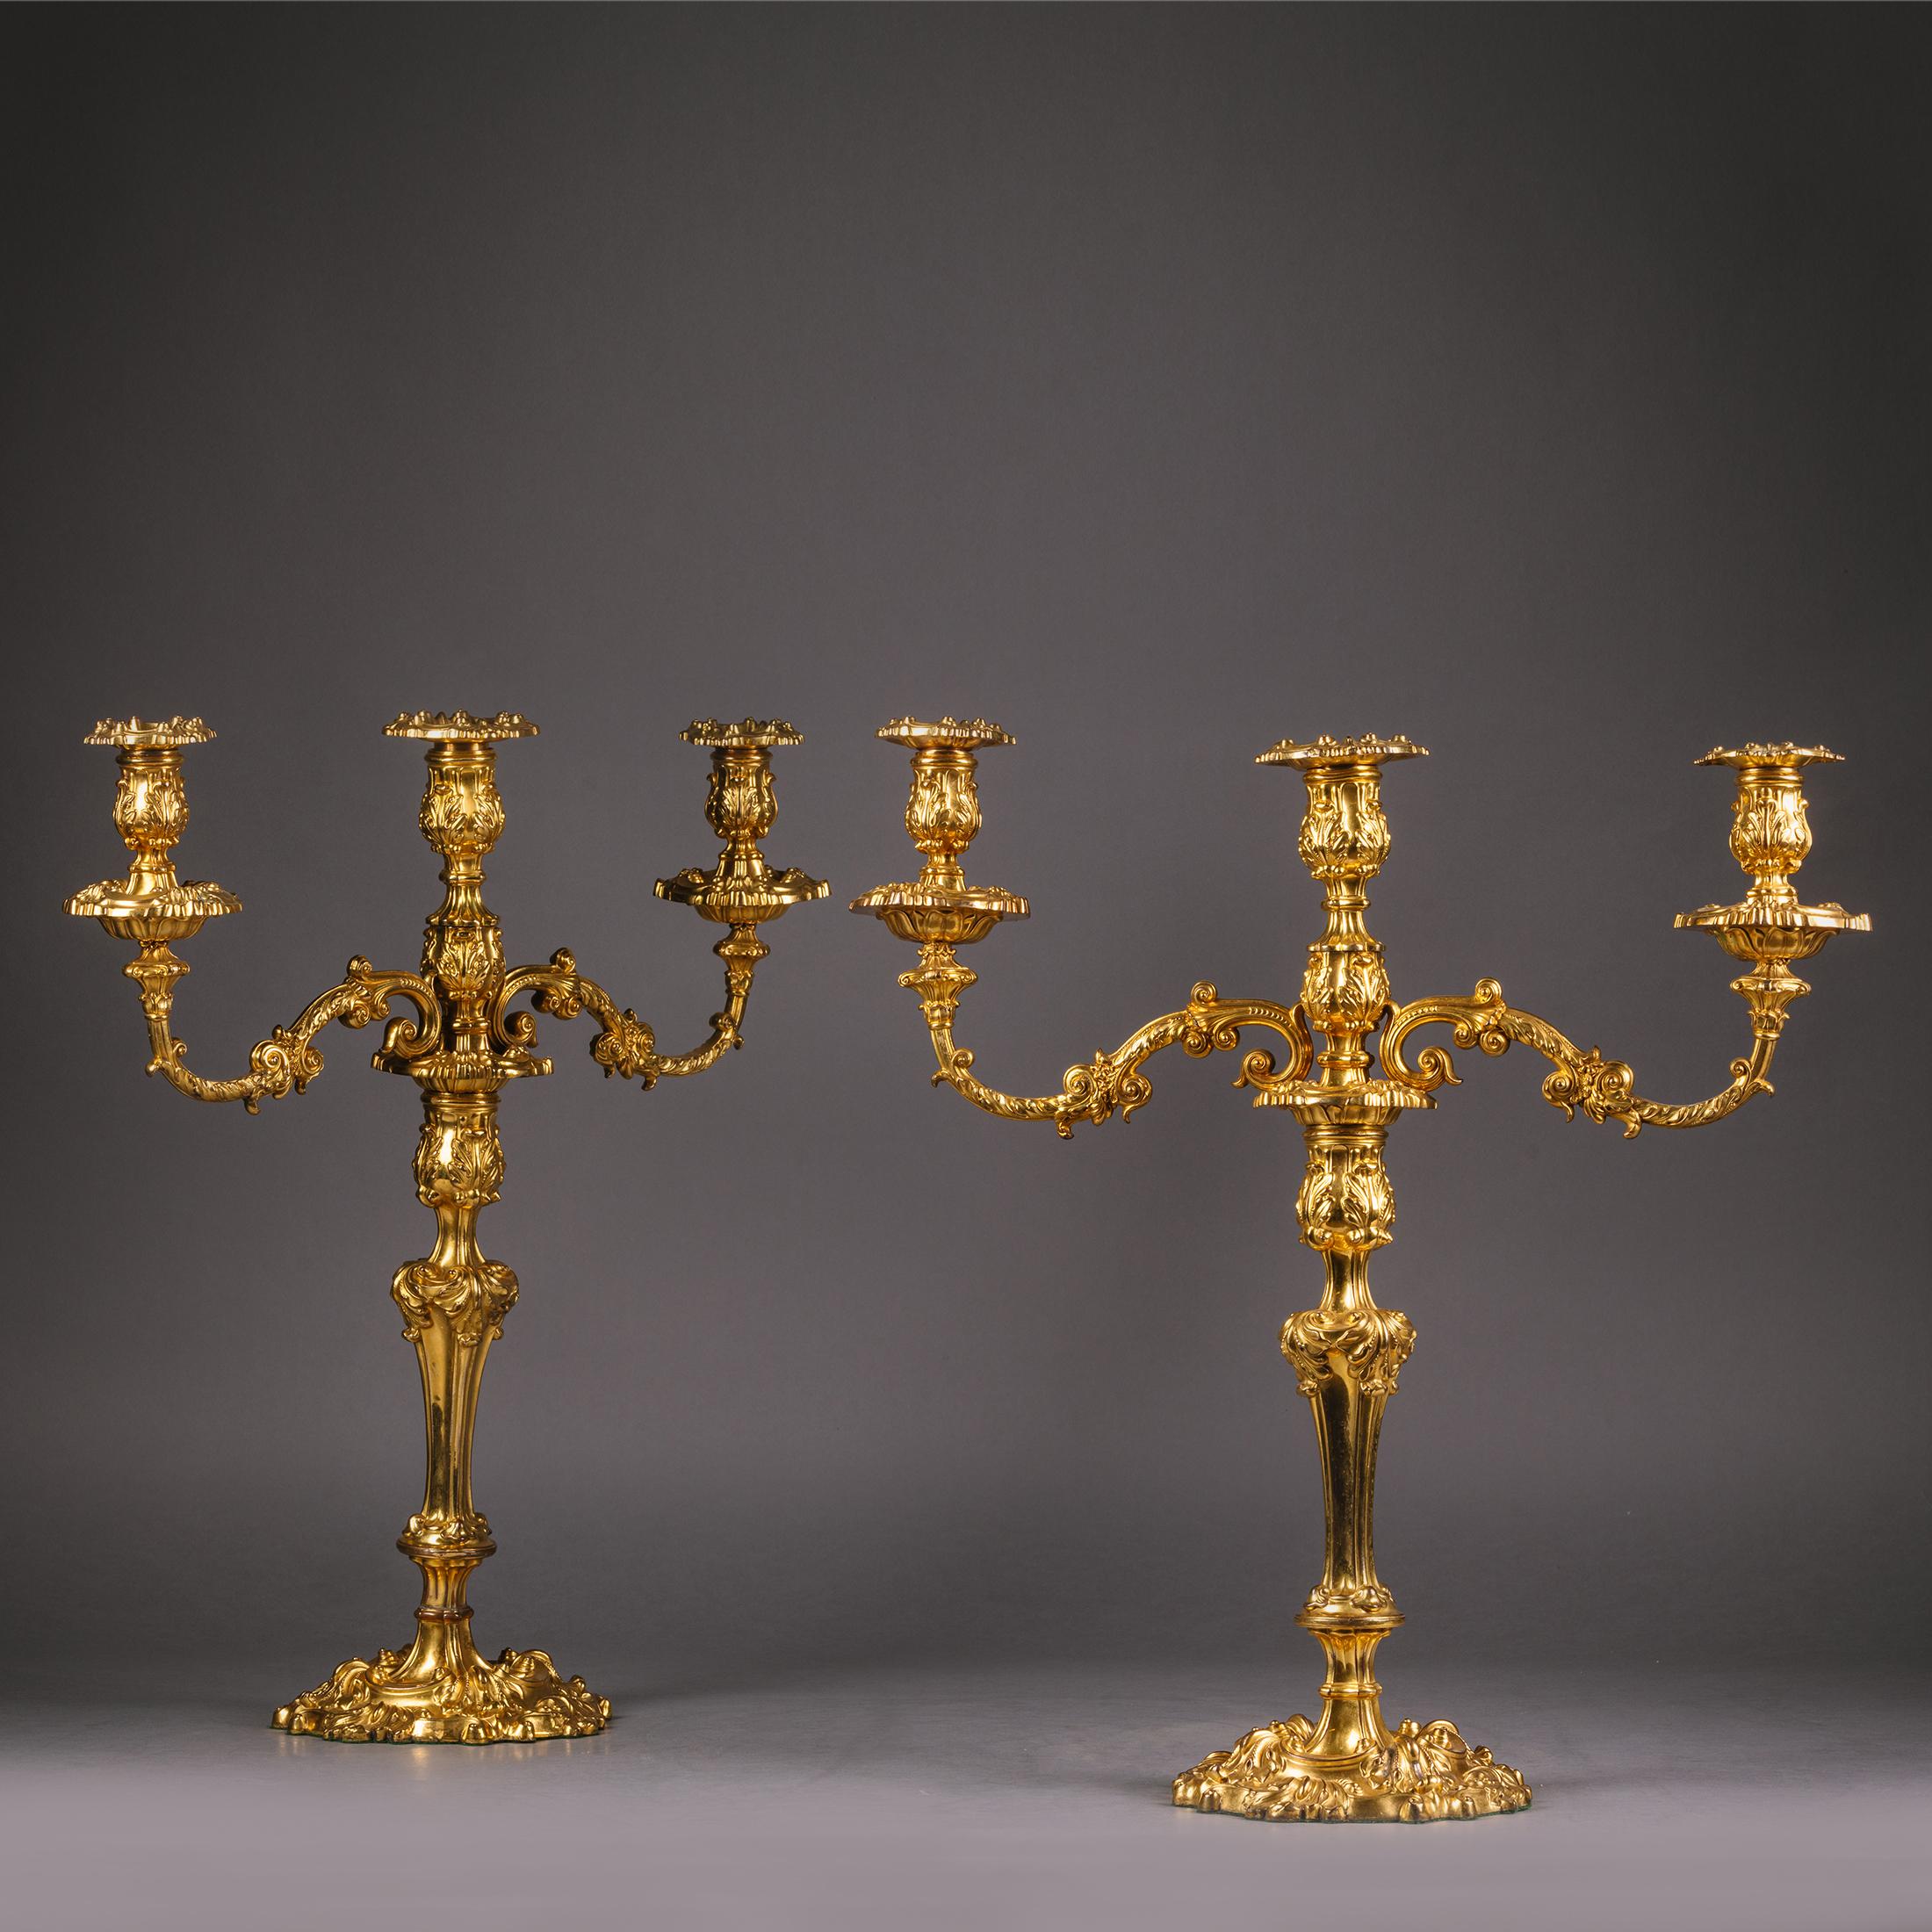 A Pair of Louis XV Style Rococo Revival Ormolu Three-Light Candelabra.

Finely cast in the Rococo Revival style this fine pair of English candelabra have baluster stems and scrolling acanthus wrapped branches terminating in circular dip trays and